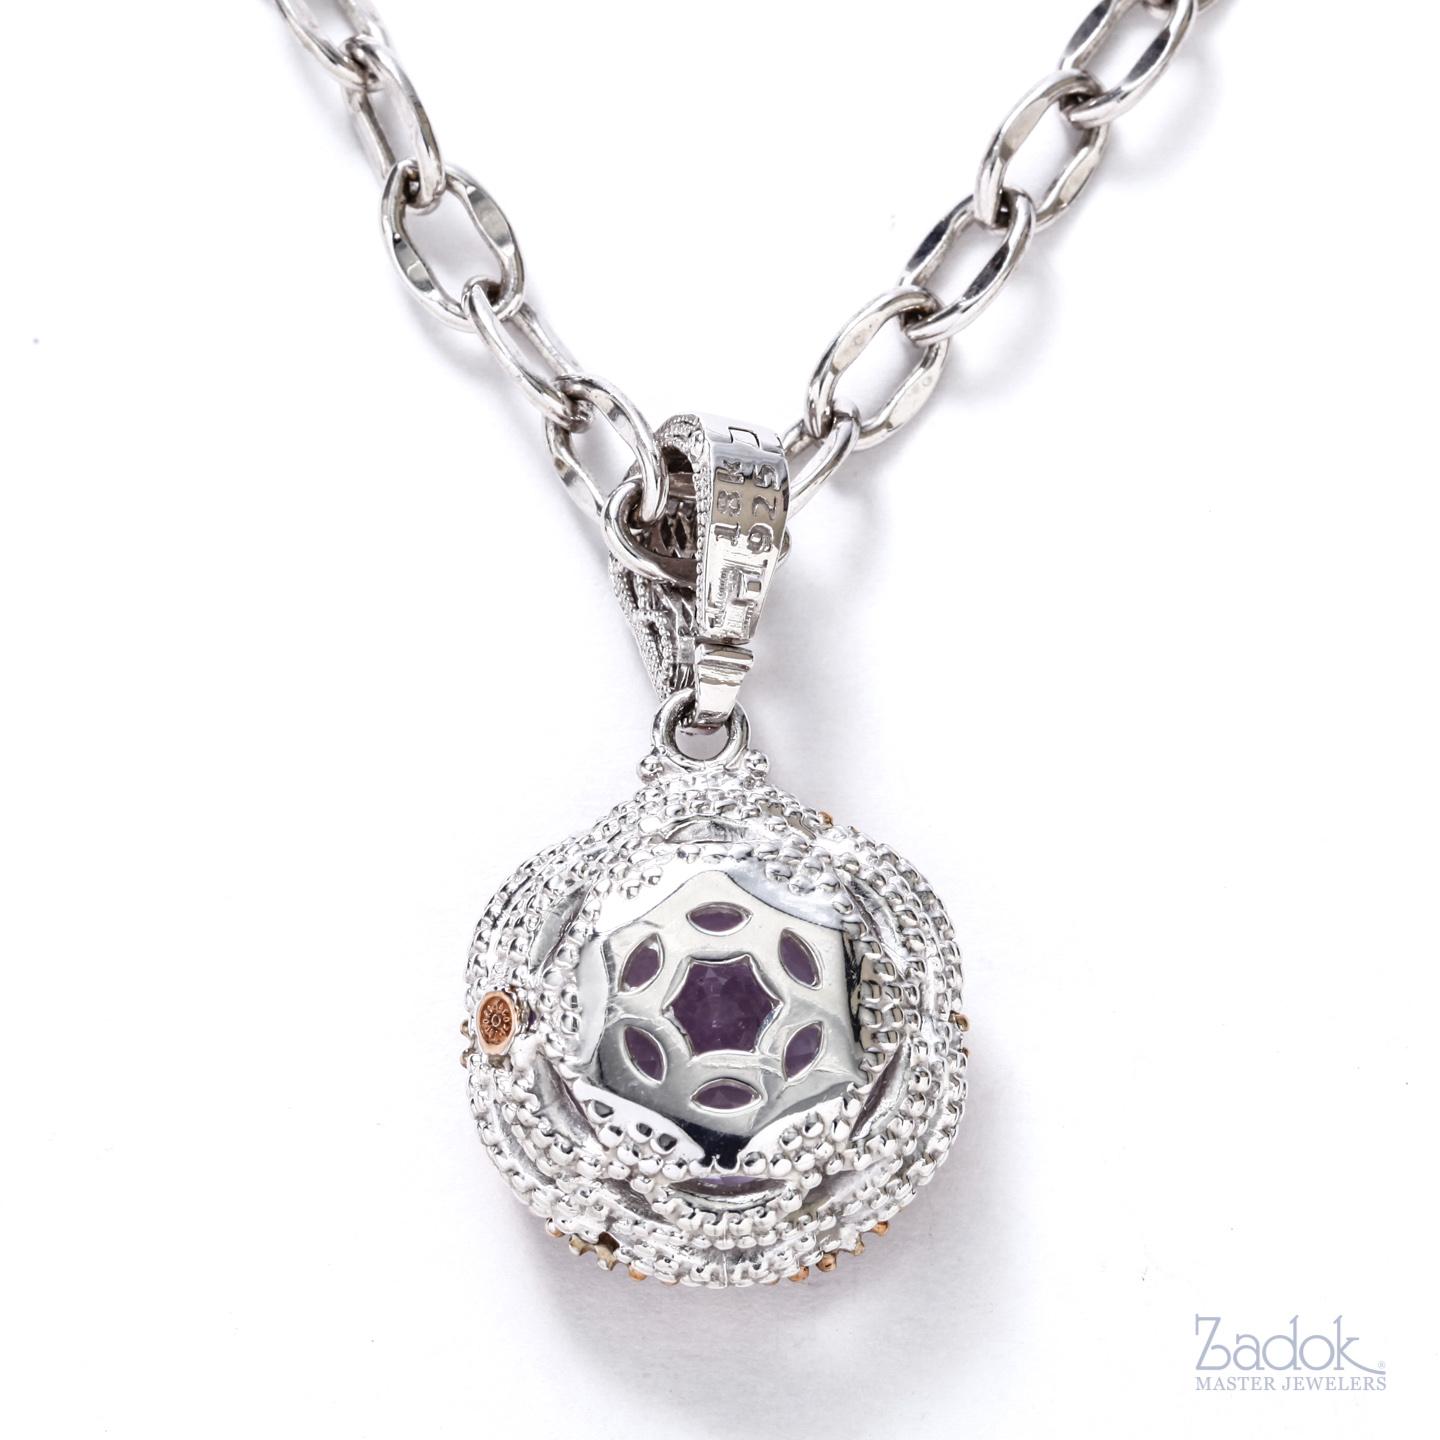 Round Cut Tacori Amethyst Pendant and Chain, Sterling Silver, 18 Karat Gold, 12.50 Carat For Sale